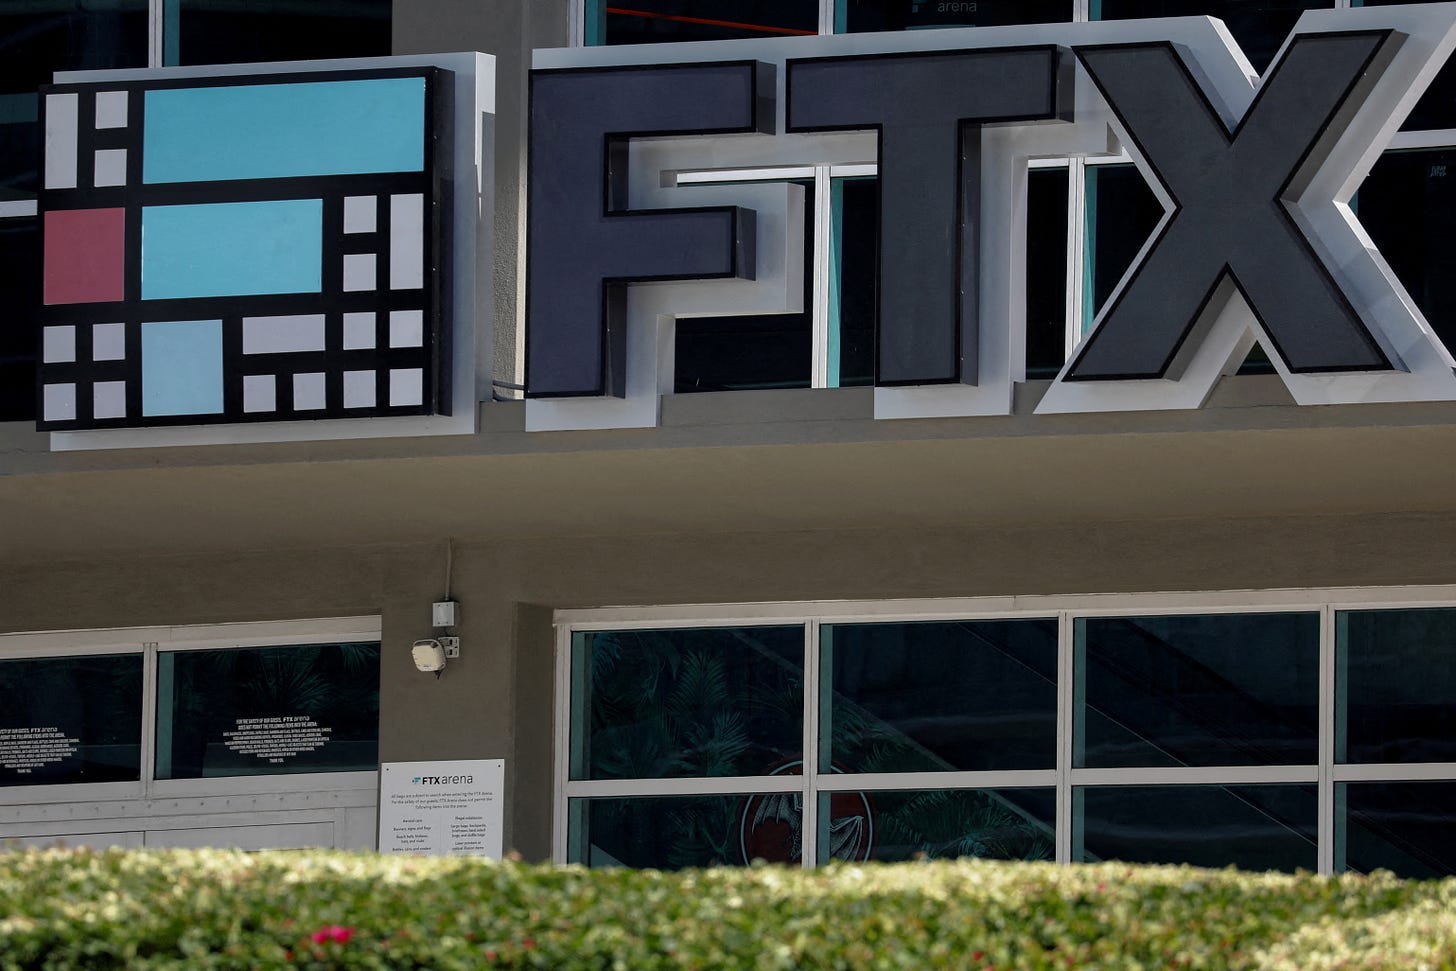 The logo of FTX is seen at the FTX Arena in Miami